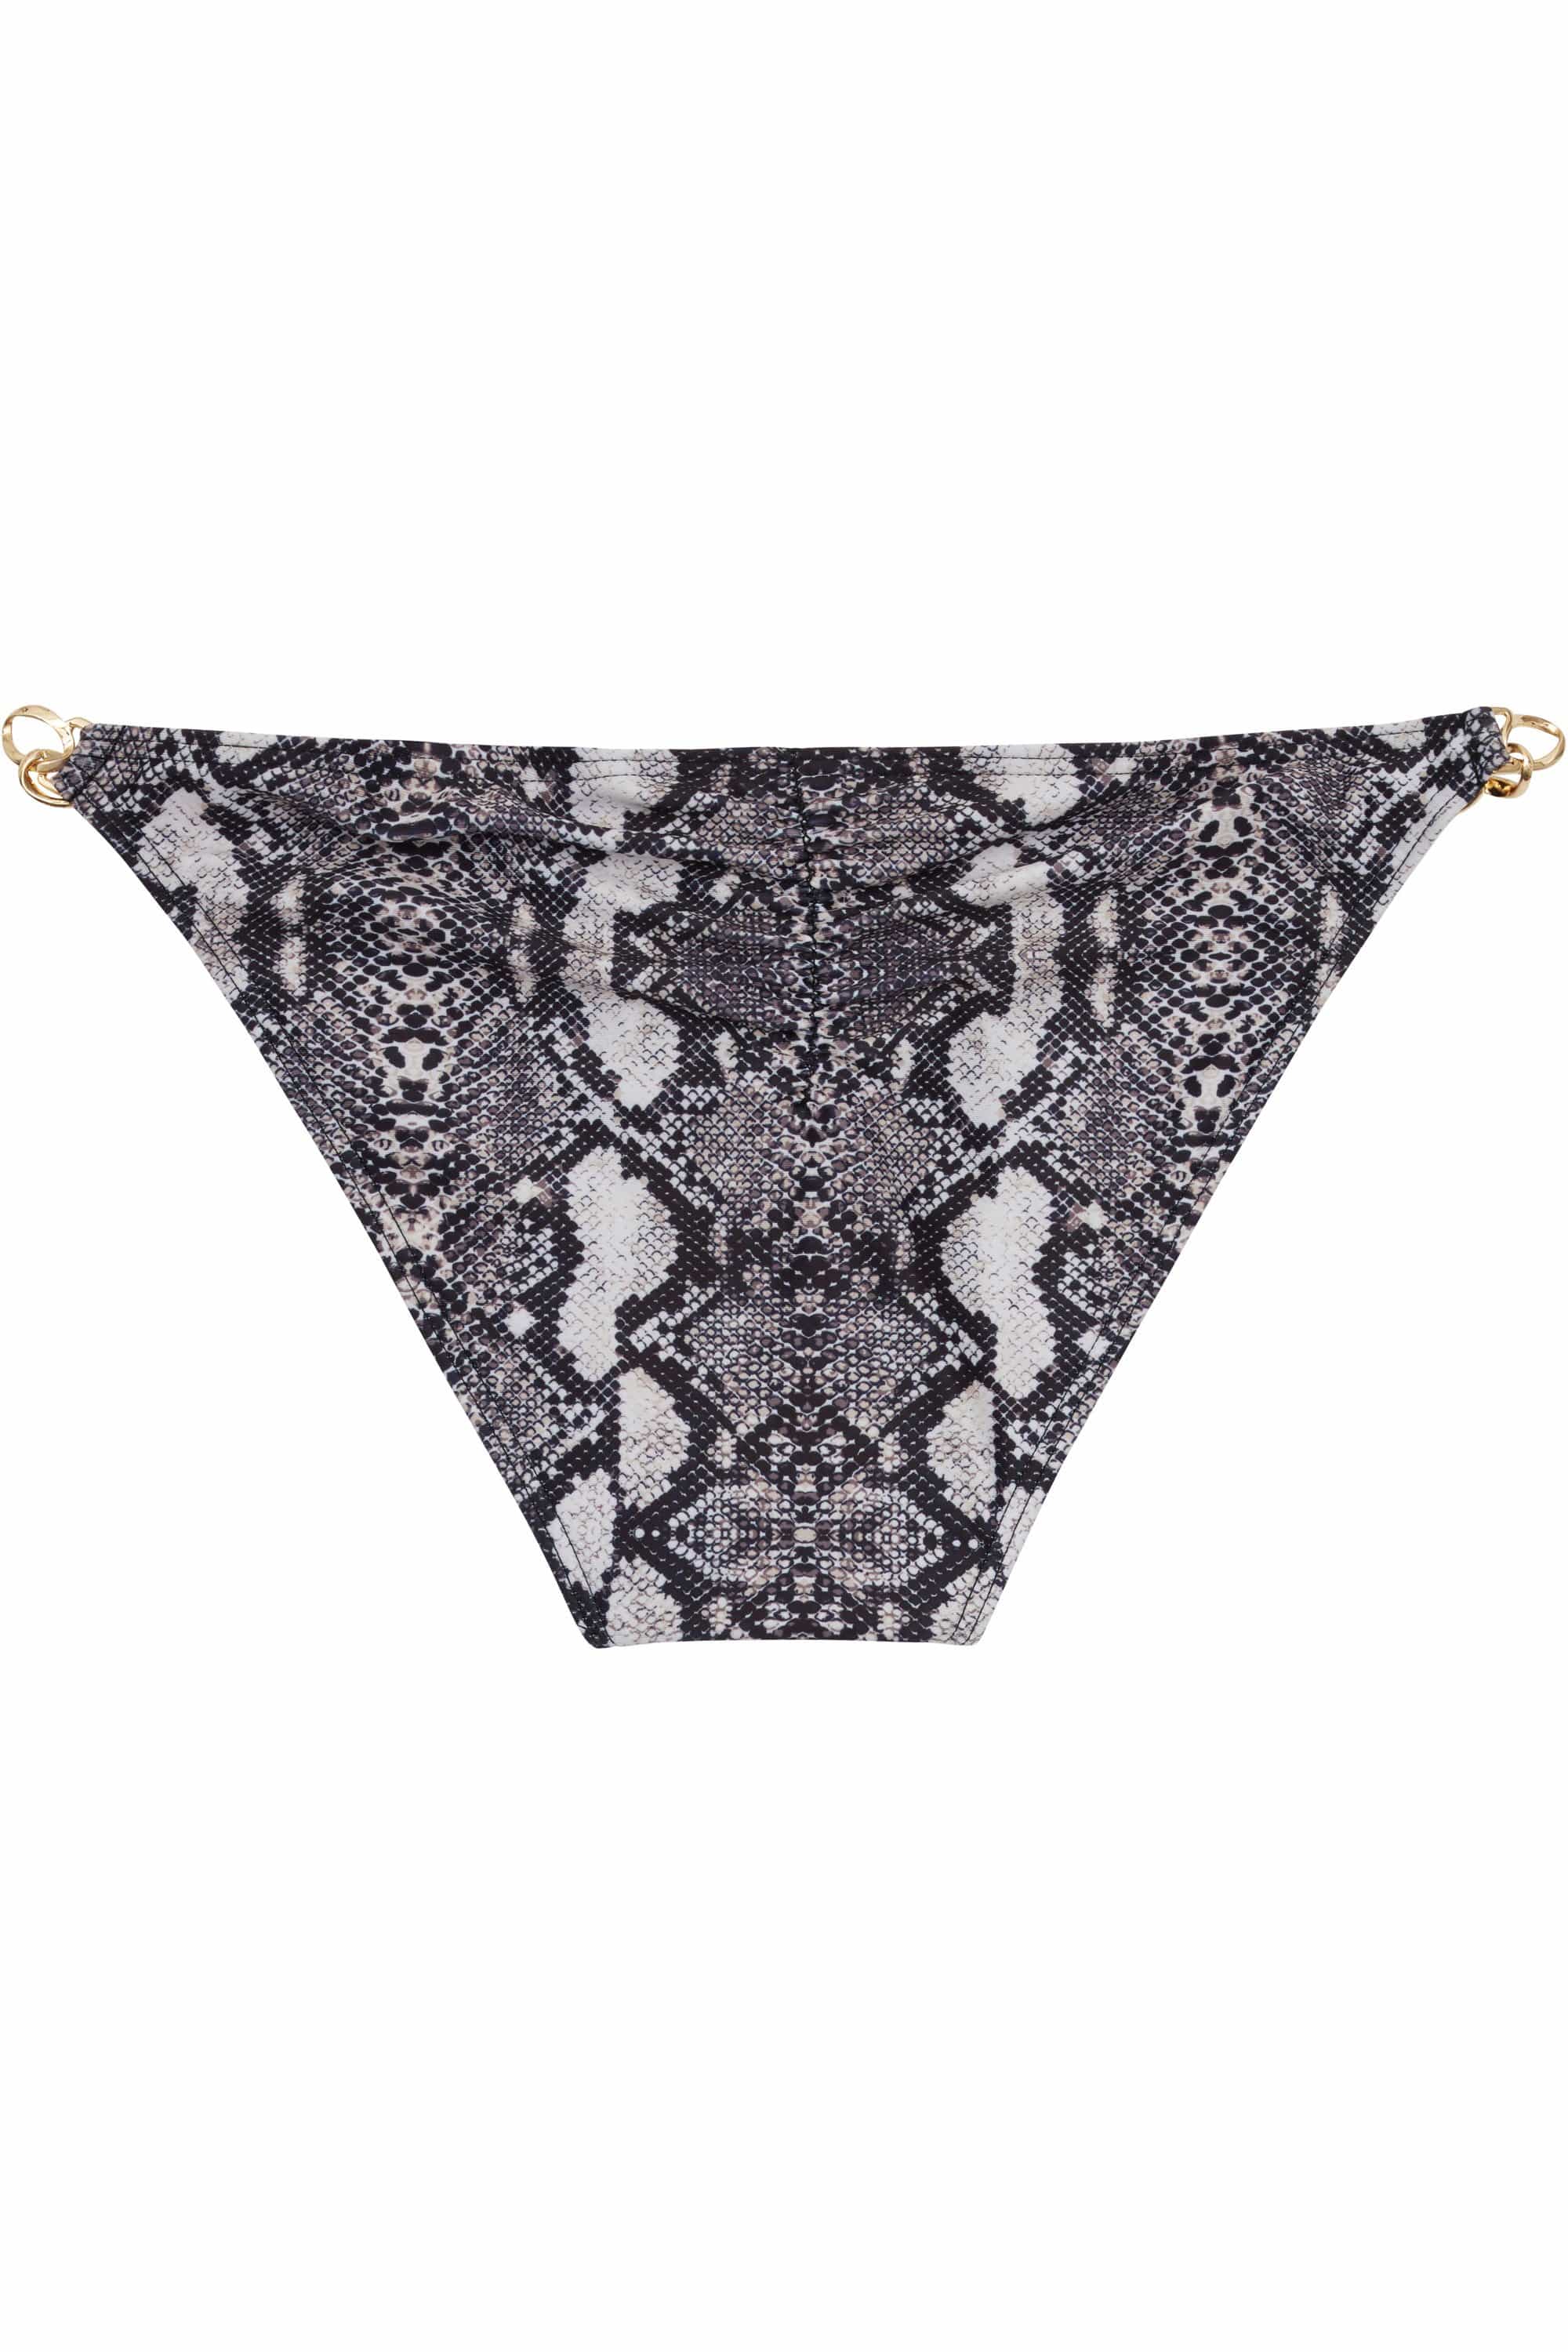 Wolf & Whistle Eco Snakeskin chain hipster brief